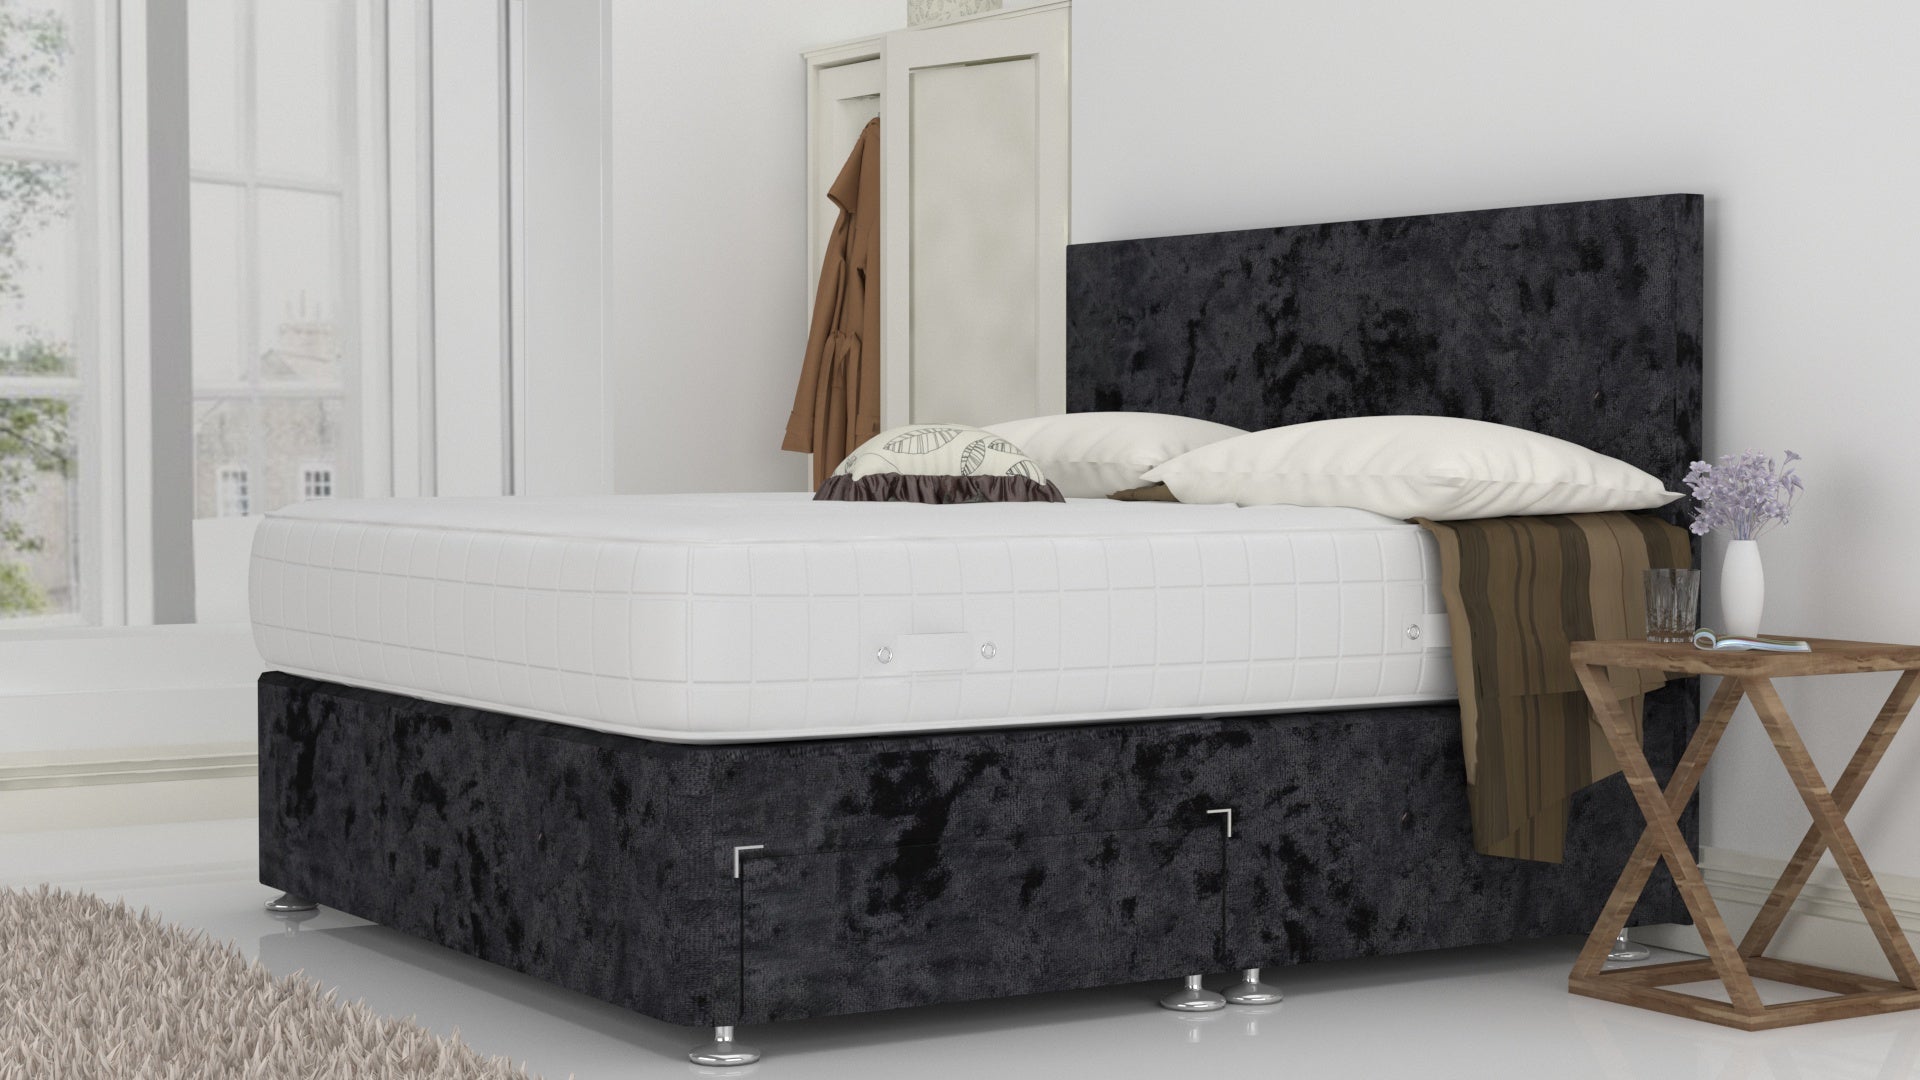 Black Crushed 6 Feet Divan Bed Set With Plain Headboard (Included Feet) And Free Memory Foam Mattress